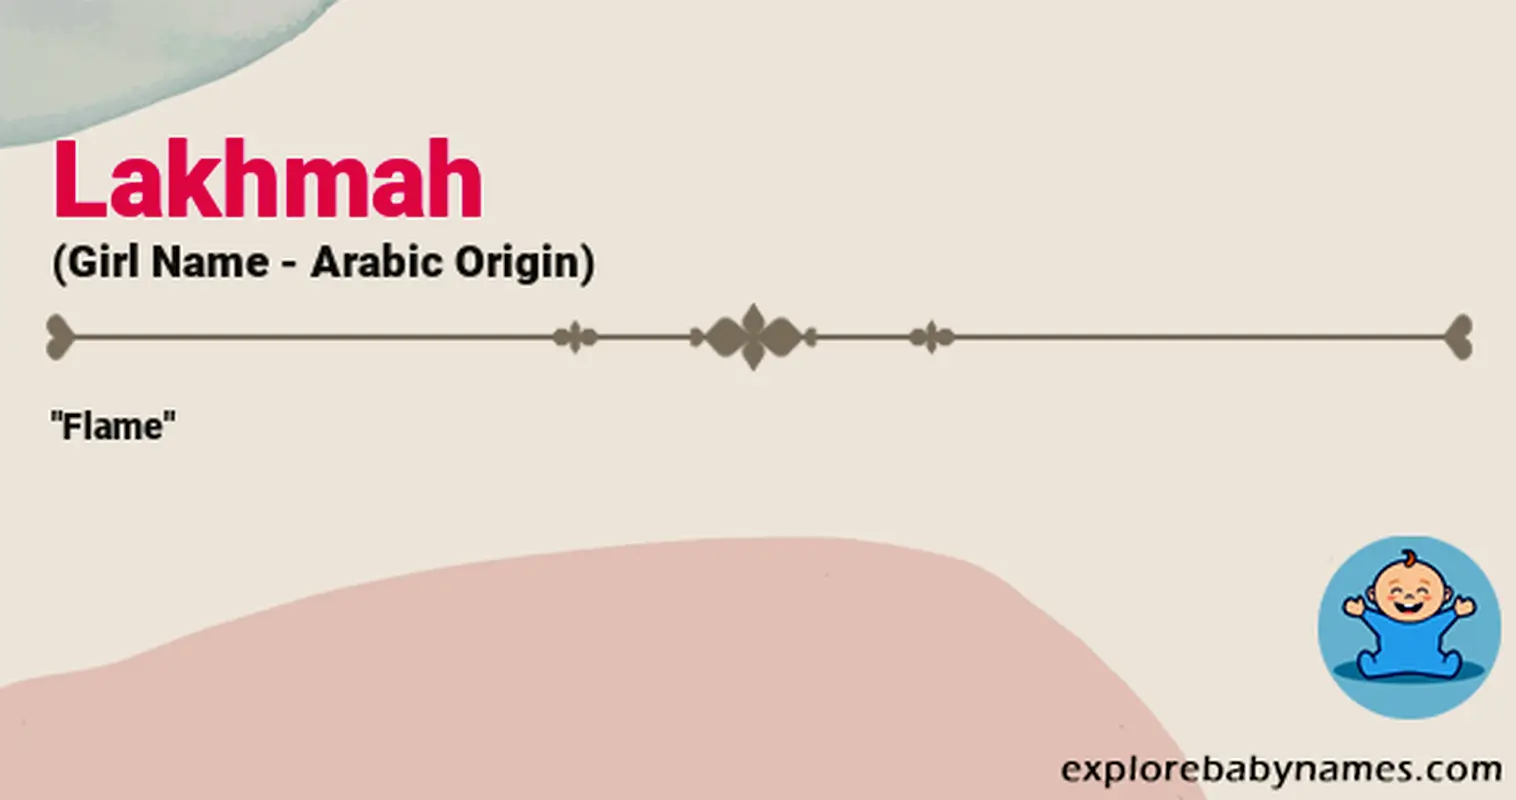 Meaning of Lakhmah